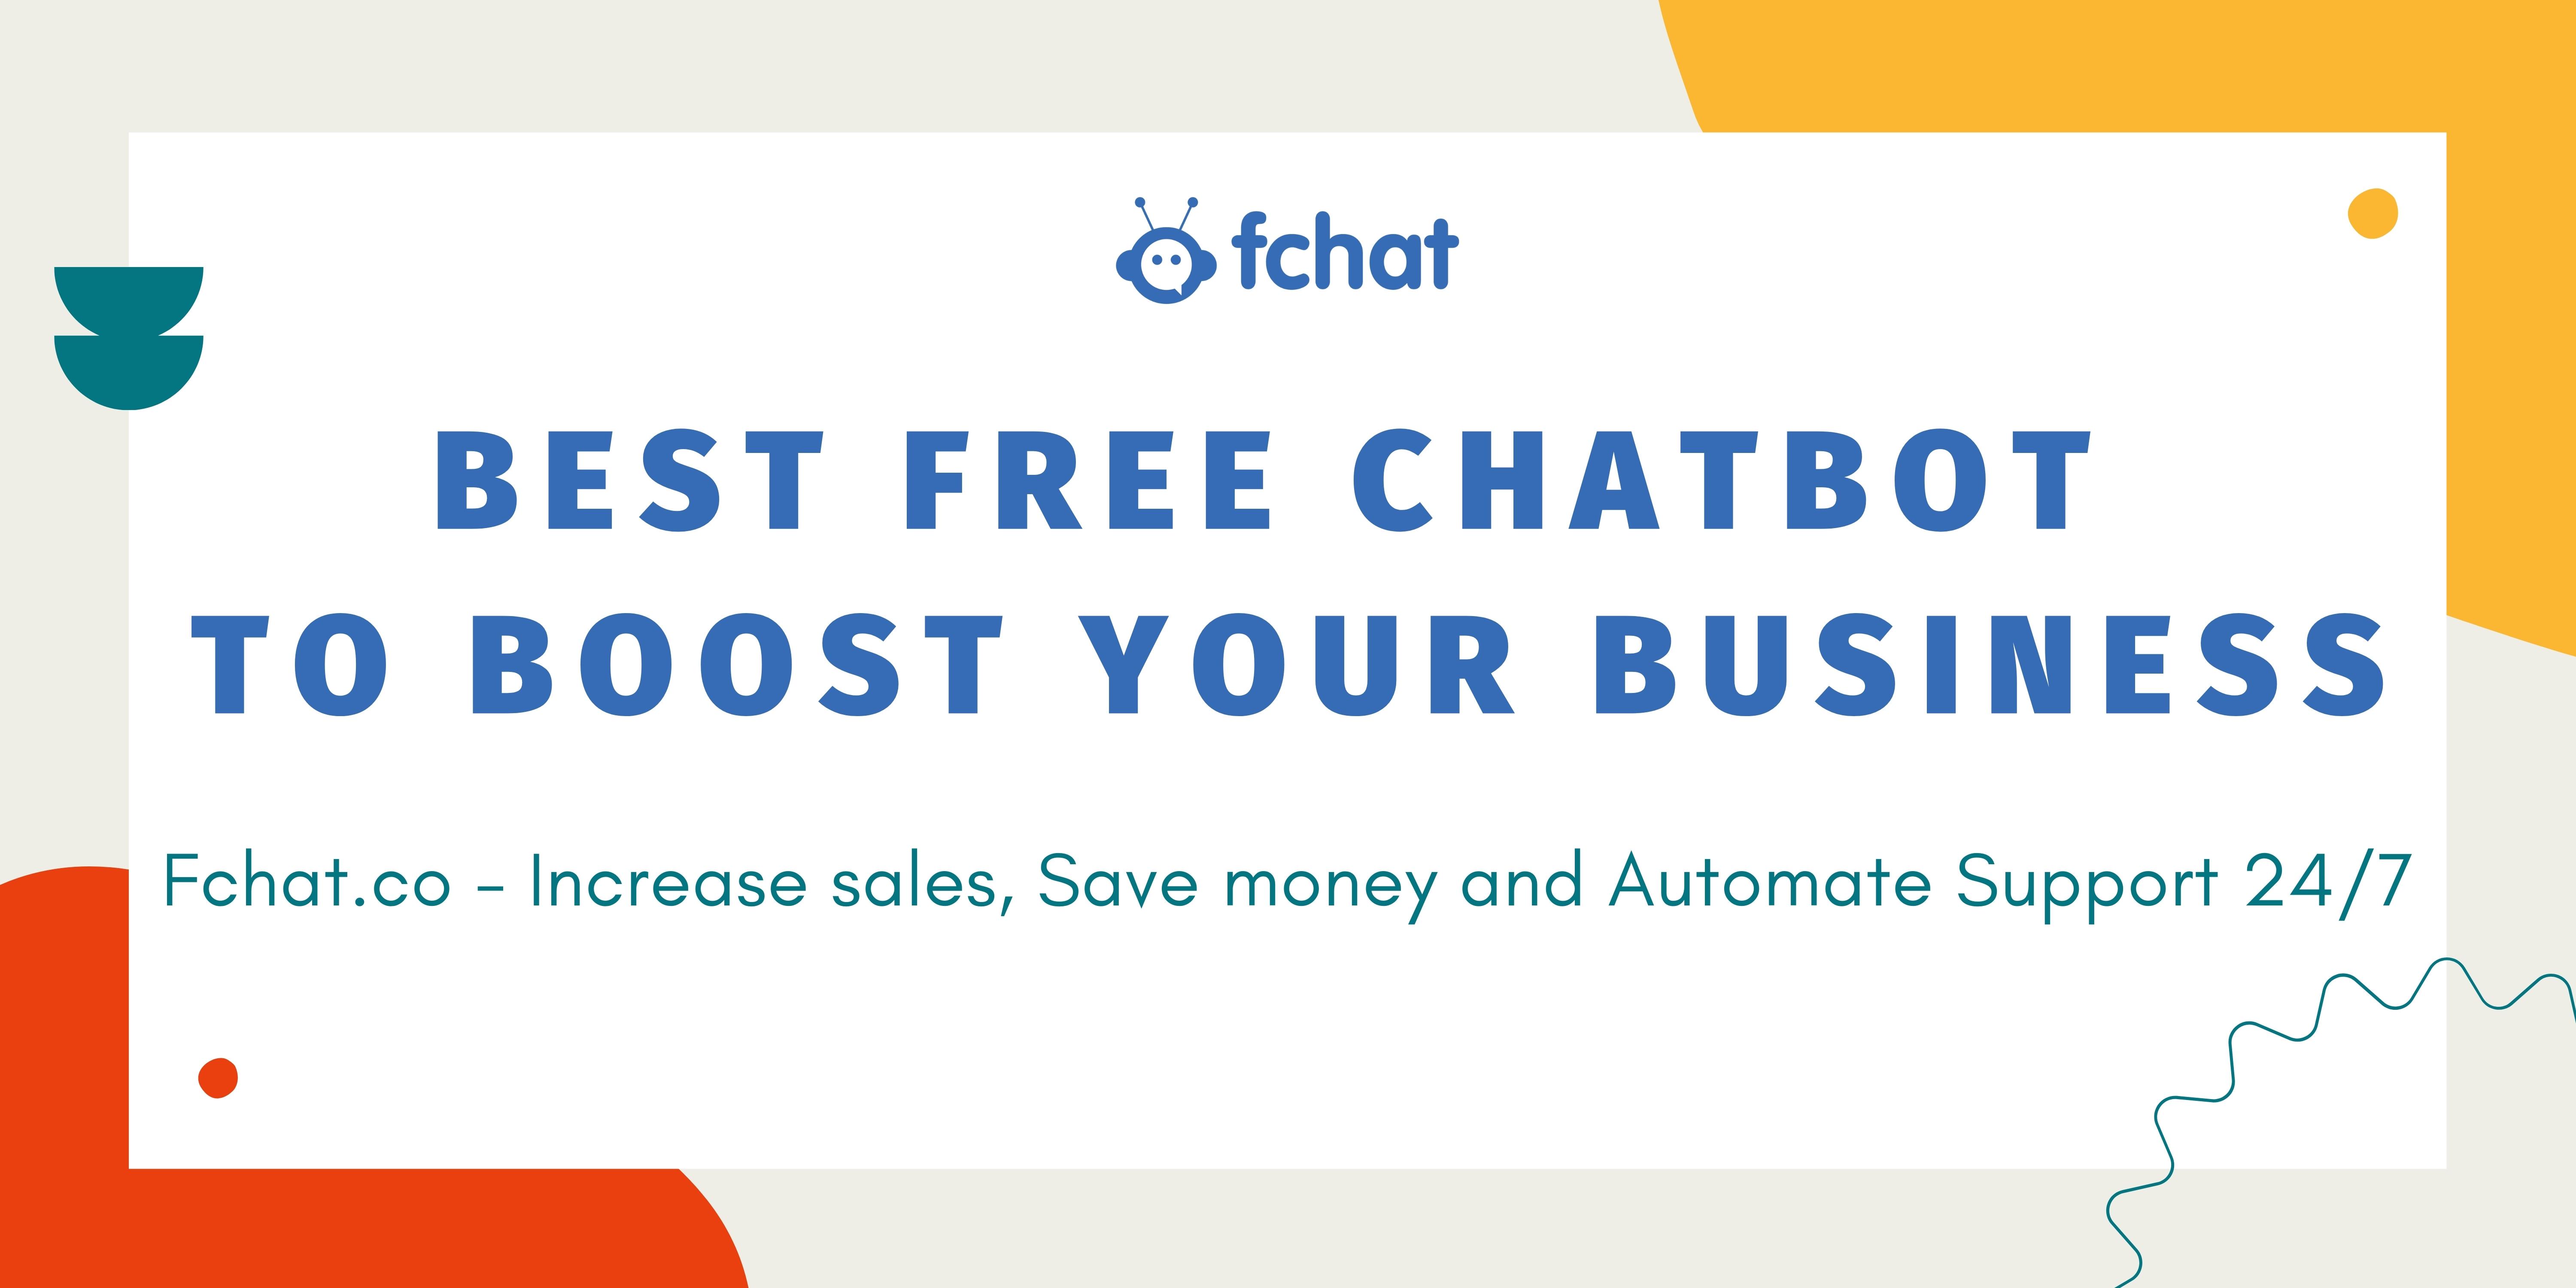 BEST FREE CHATBOT TO BOOST YOUR BUSINESS